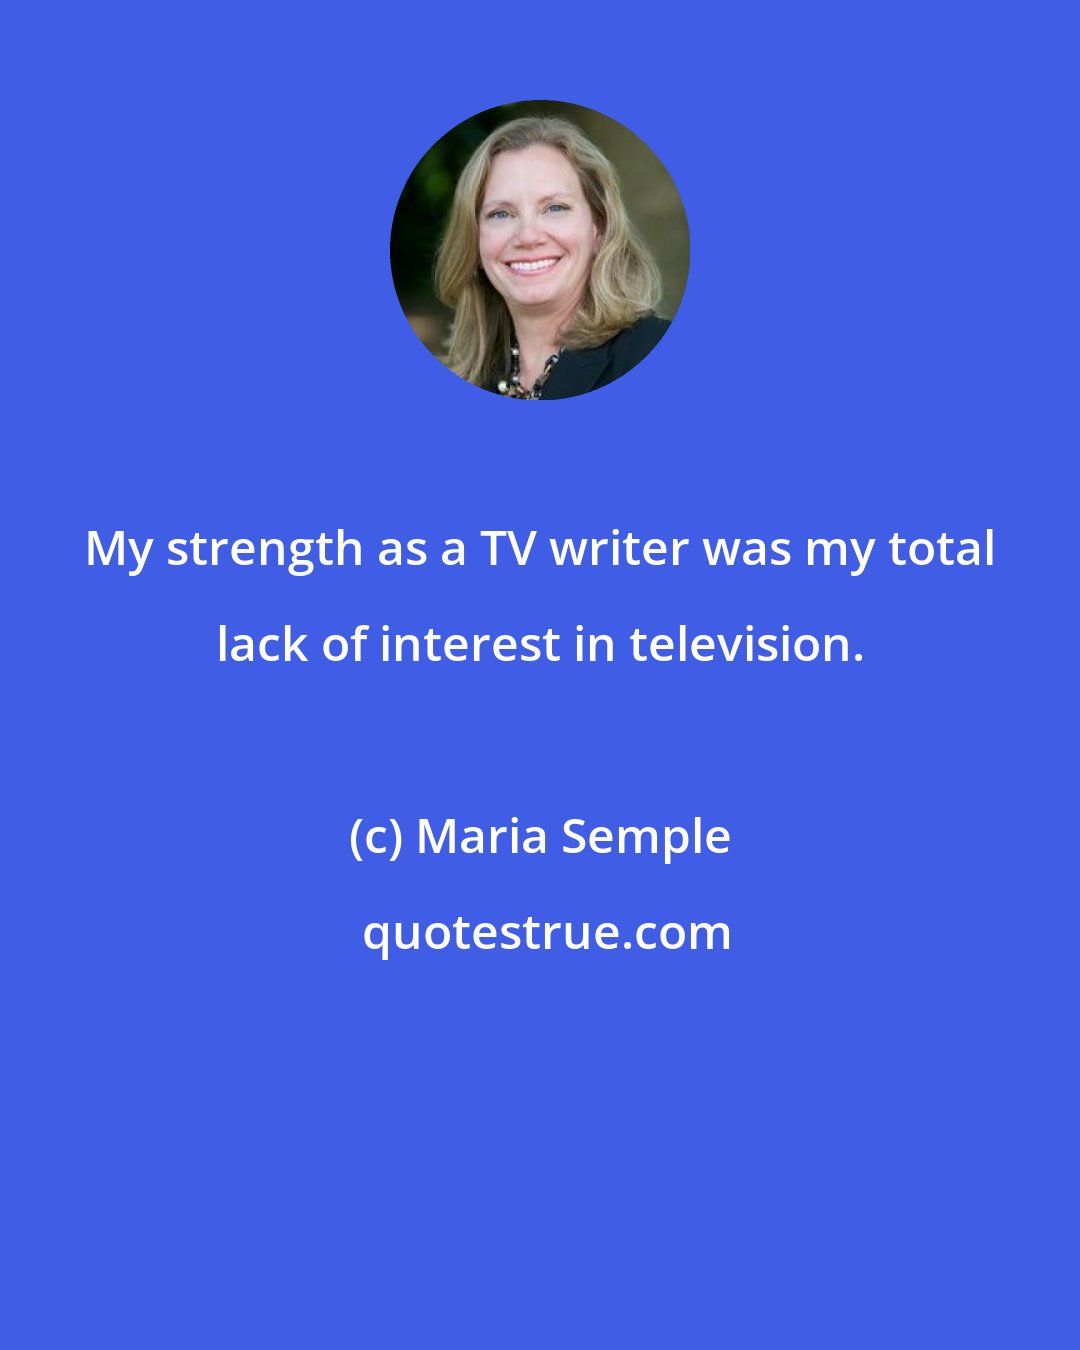 Maria Semple: My strength as a TV writer was my total lack of interest in television.